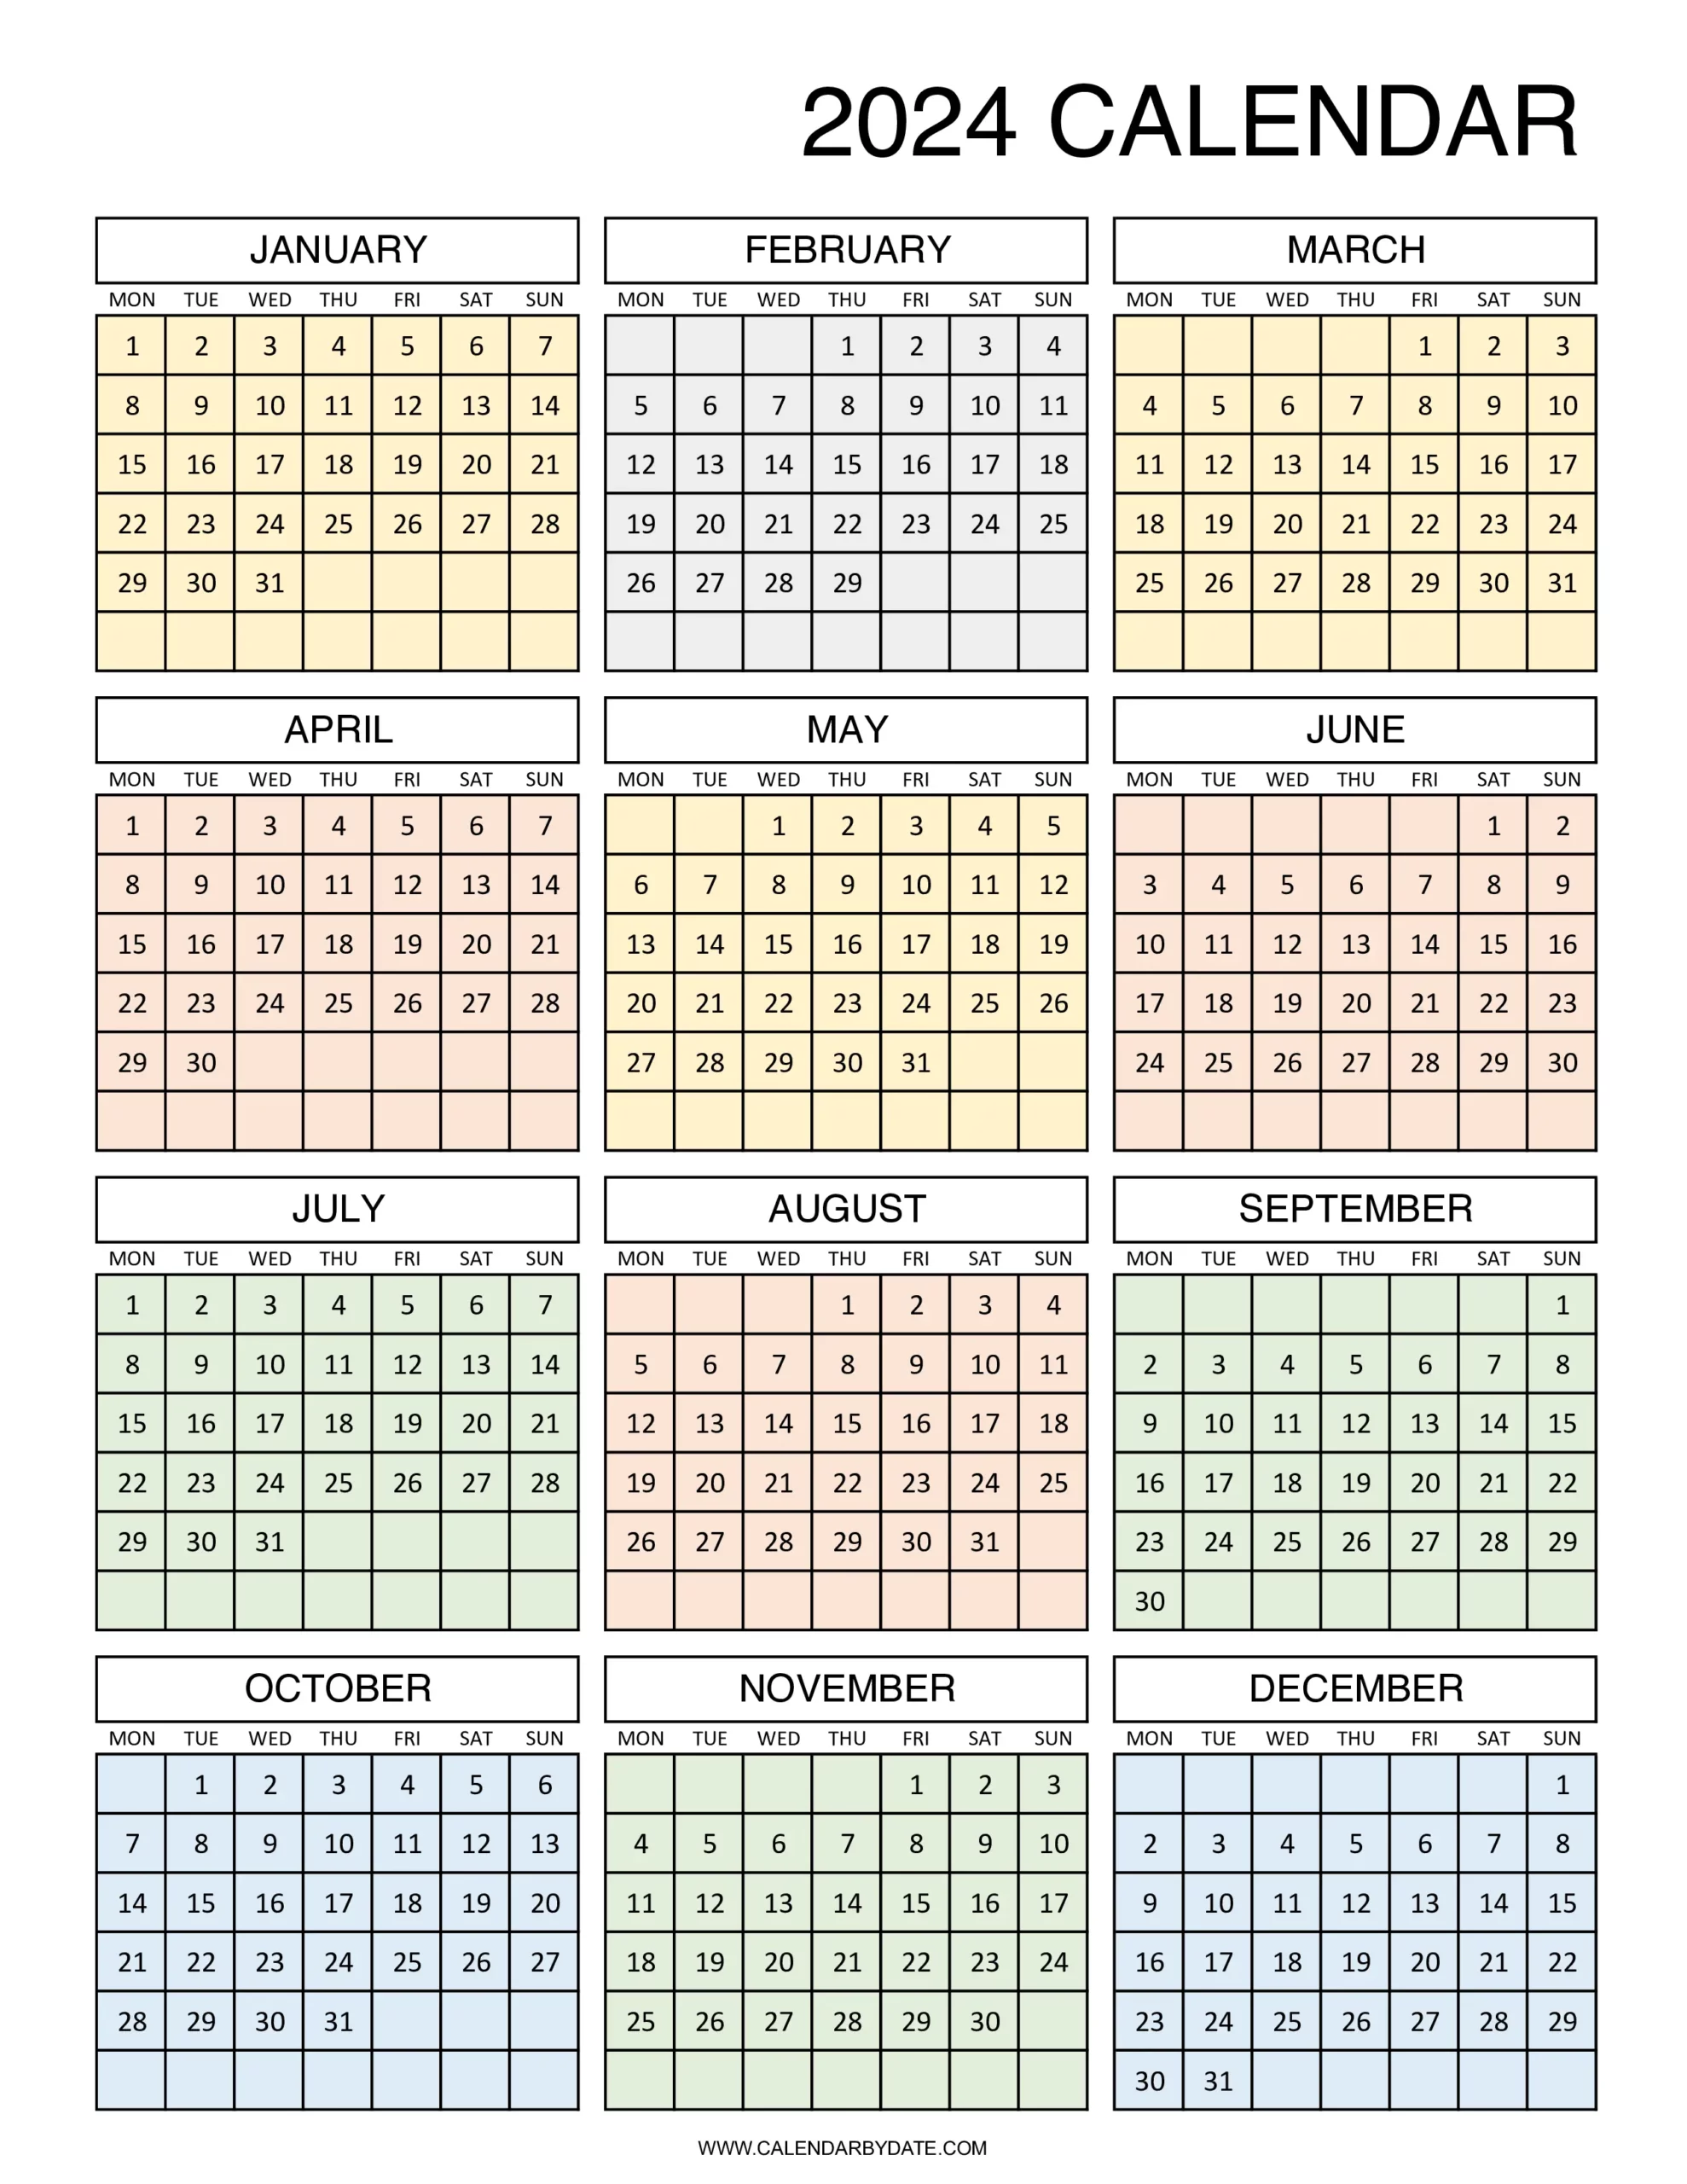 Monday start colorful 12 month grid is designed in vertical layout with colors filled in the box.